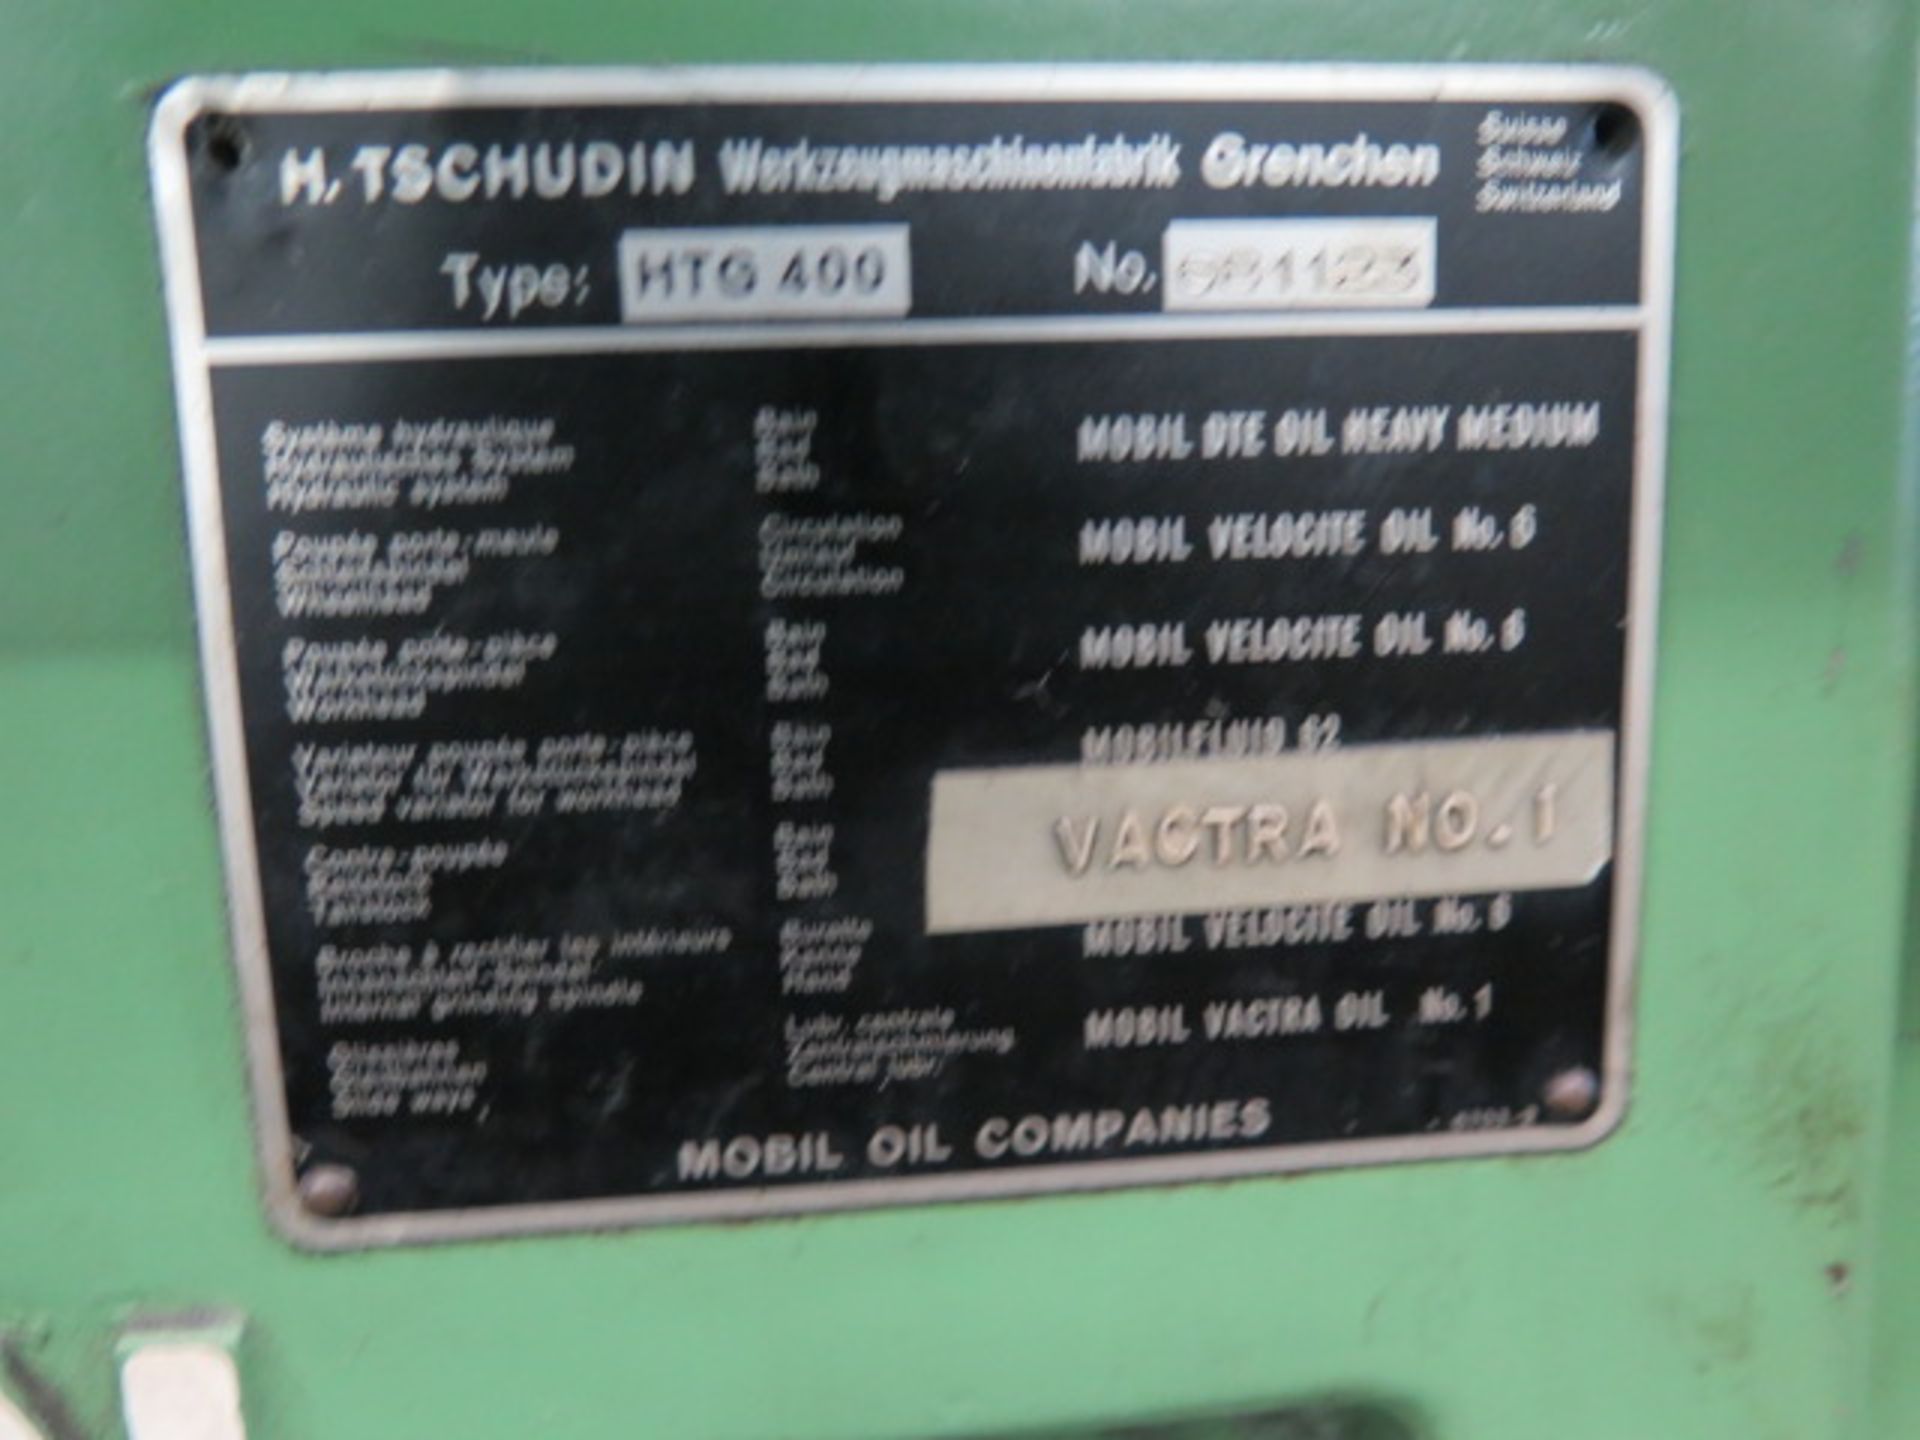 H. Tschudin HTG-400 Cylindrical Grinder s/n 681123 w/ Work Head (MOTOR REMOVED), SOLD AS IS - Image 12 of 12